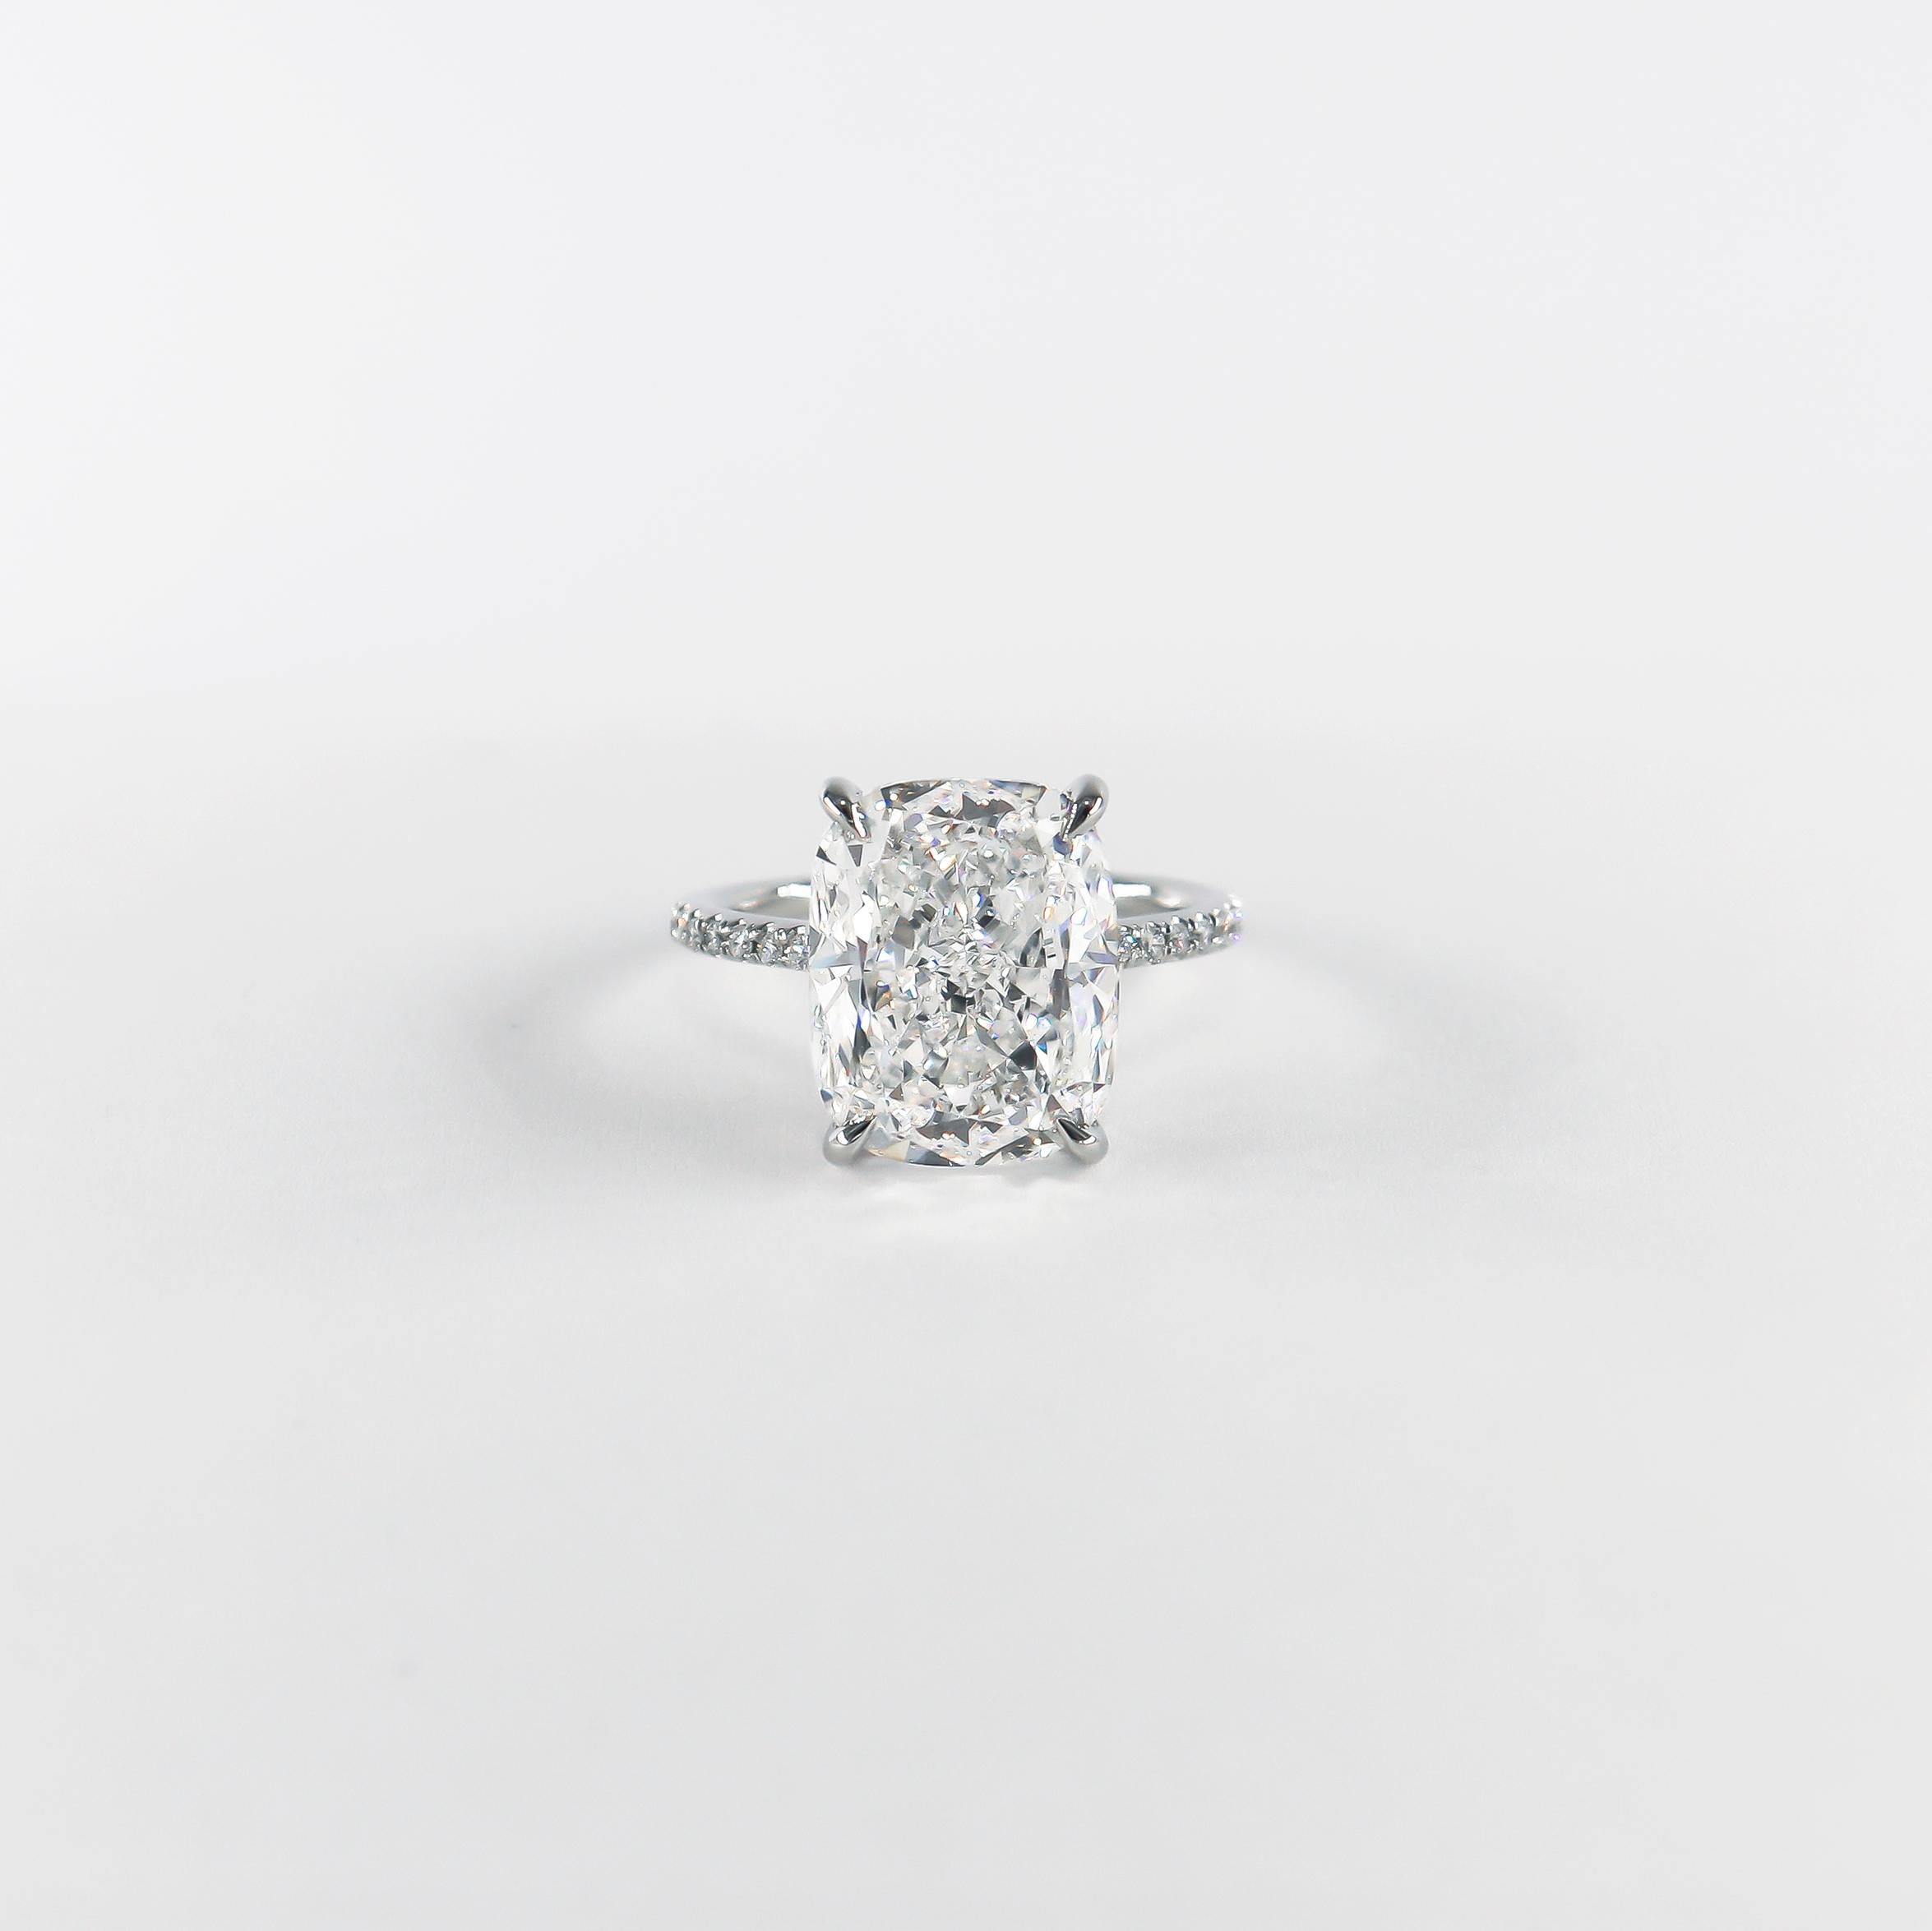 Fresh from the J. Birnbach workshop, this incredibly important ring is set with a GIA certified 8.02 carat cushion modified brilliant cut diamond of D color and SI1 clarity as described by GIA grading report #6217862937. Set in a handmade, platinum